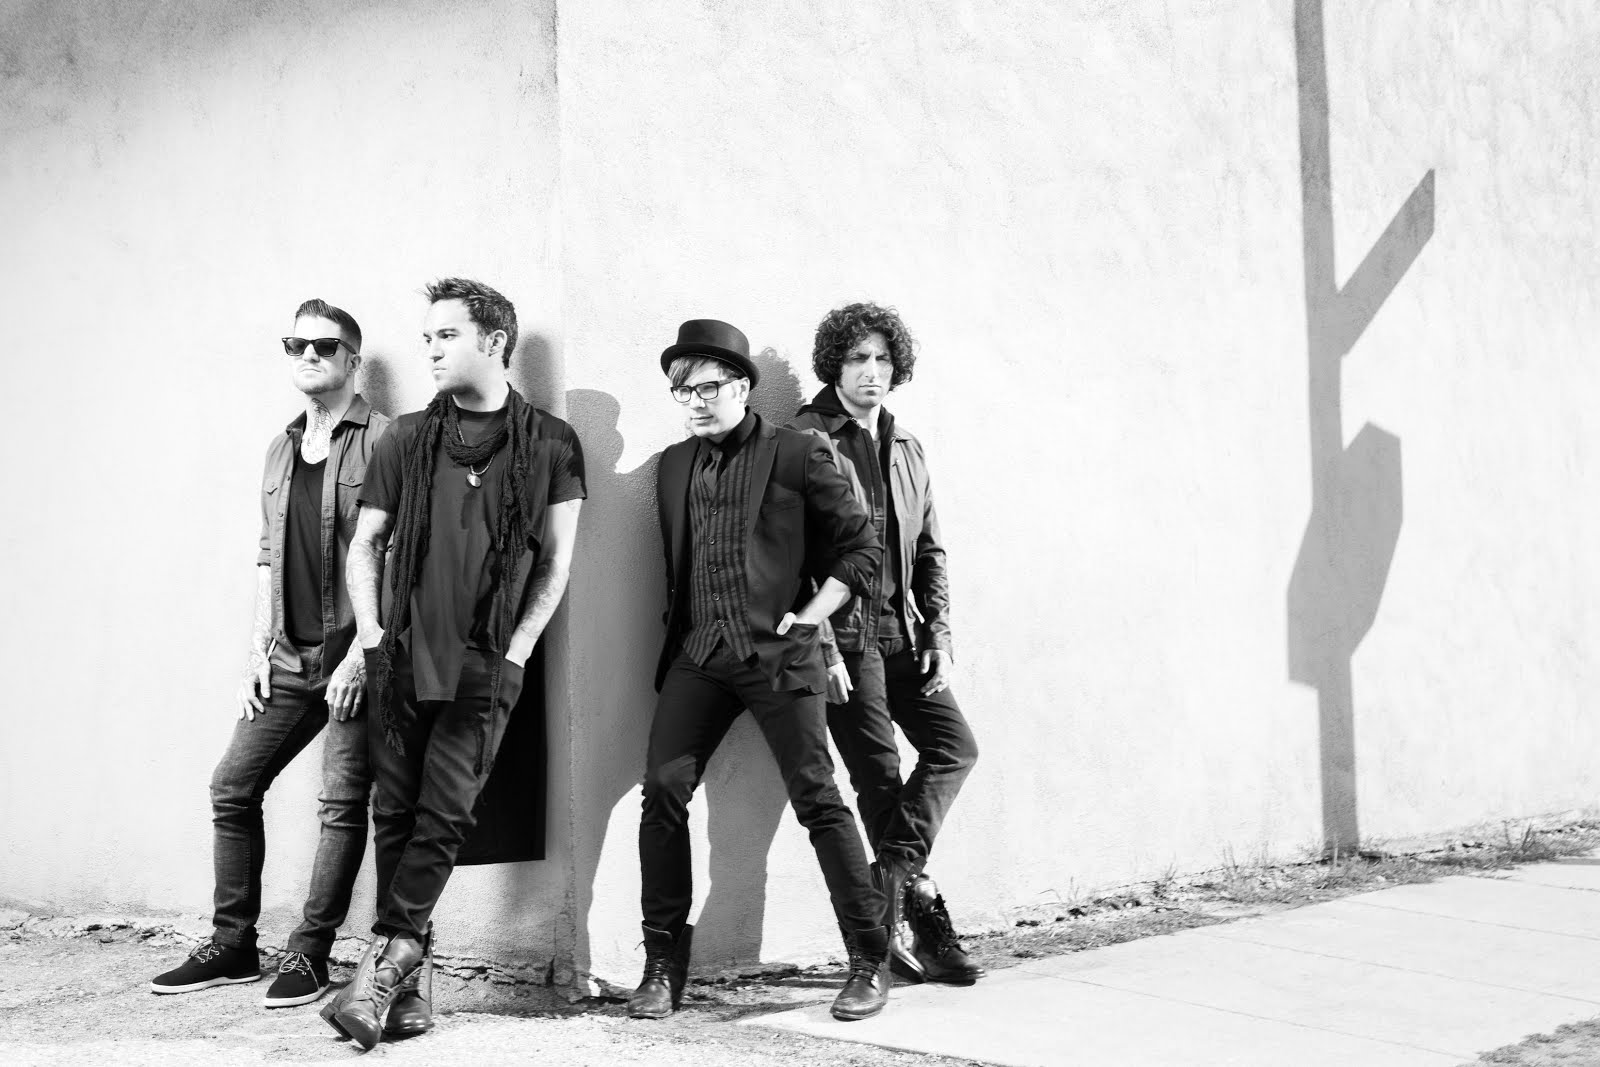 FALL OUT BOY returning to Australia this October with special guests BRITISH INDIA